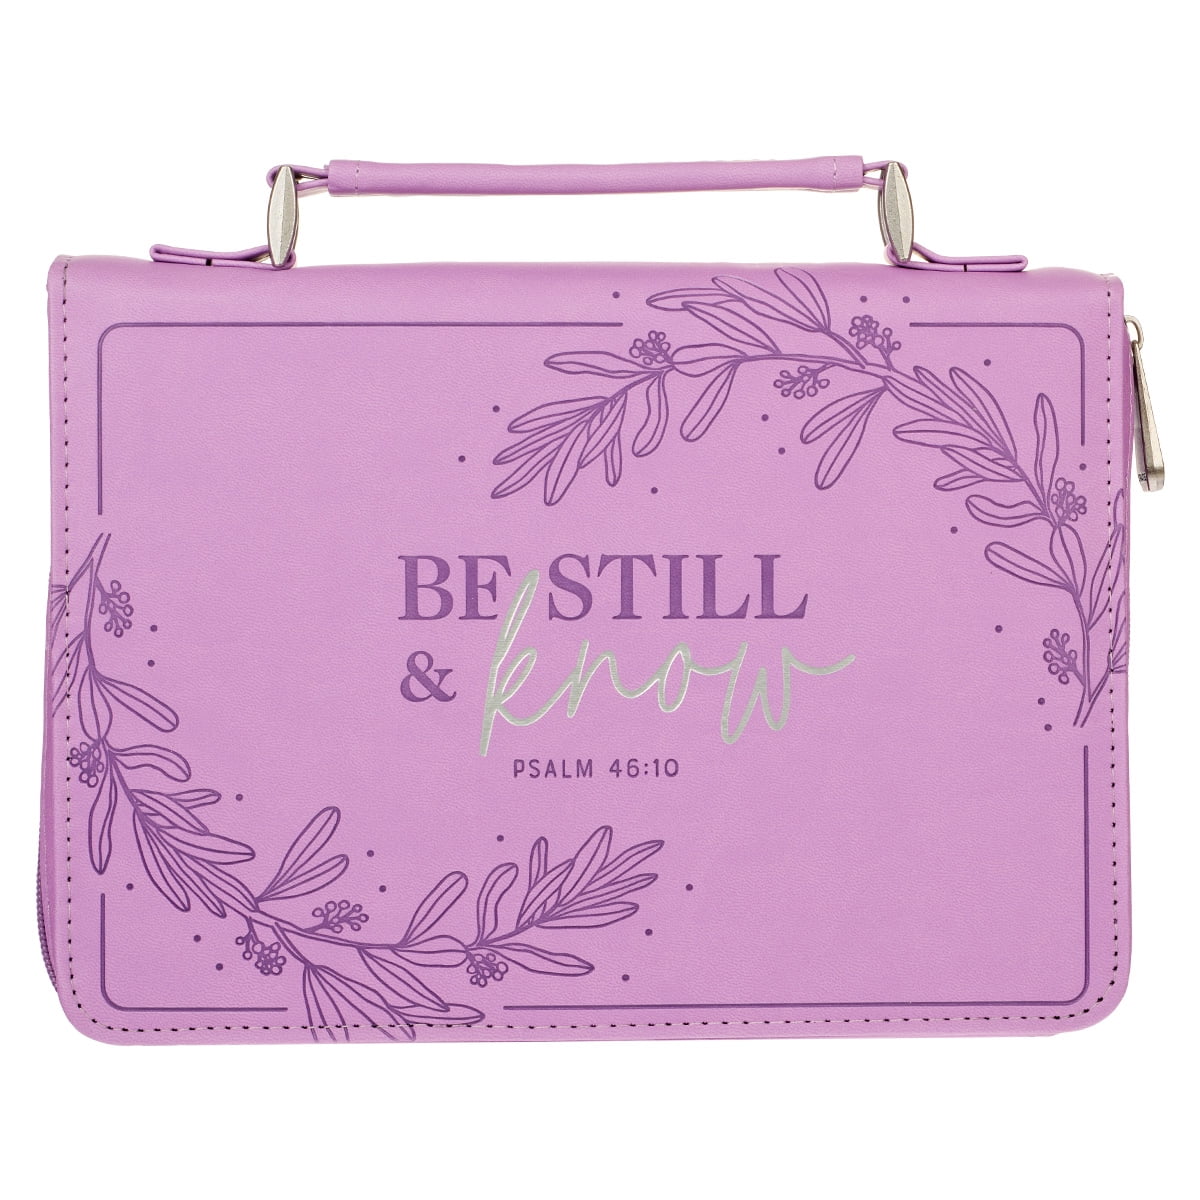 Christian Art Gifts Protective Purple Floral Faux Leather Fashion Bible  Cover Carry Case with Handle for Women: Be Still and Know - Psalm 46:11  Inspirational Bible Verse, Medium - Walmart.com